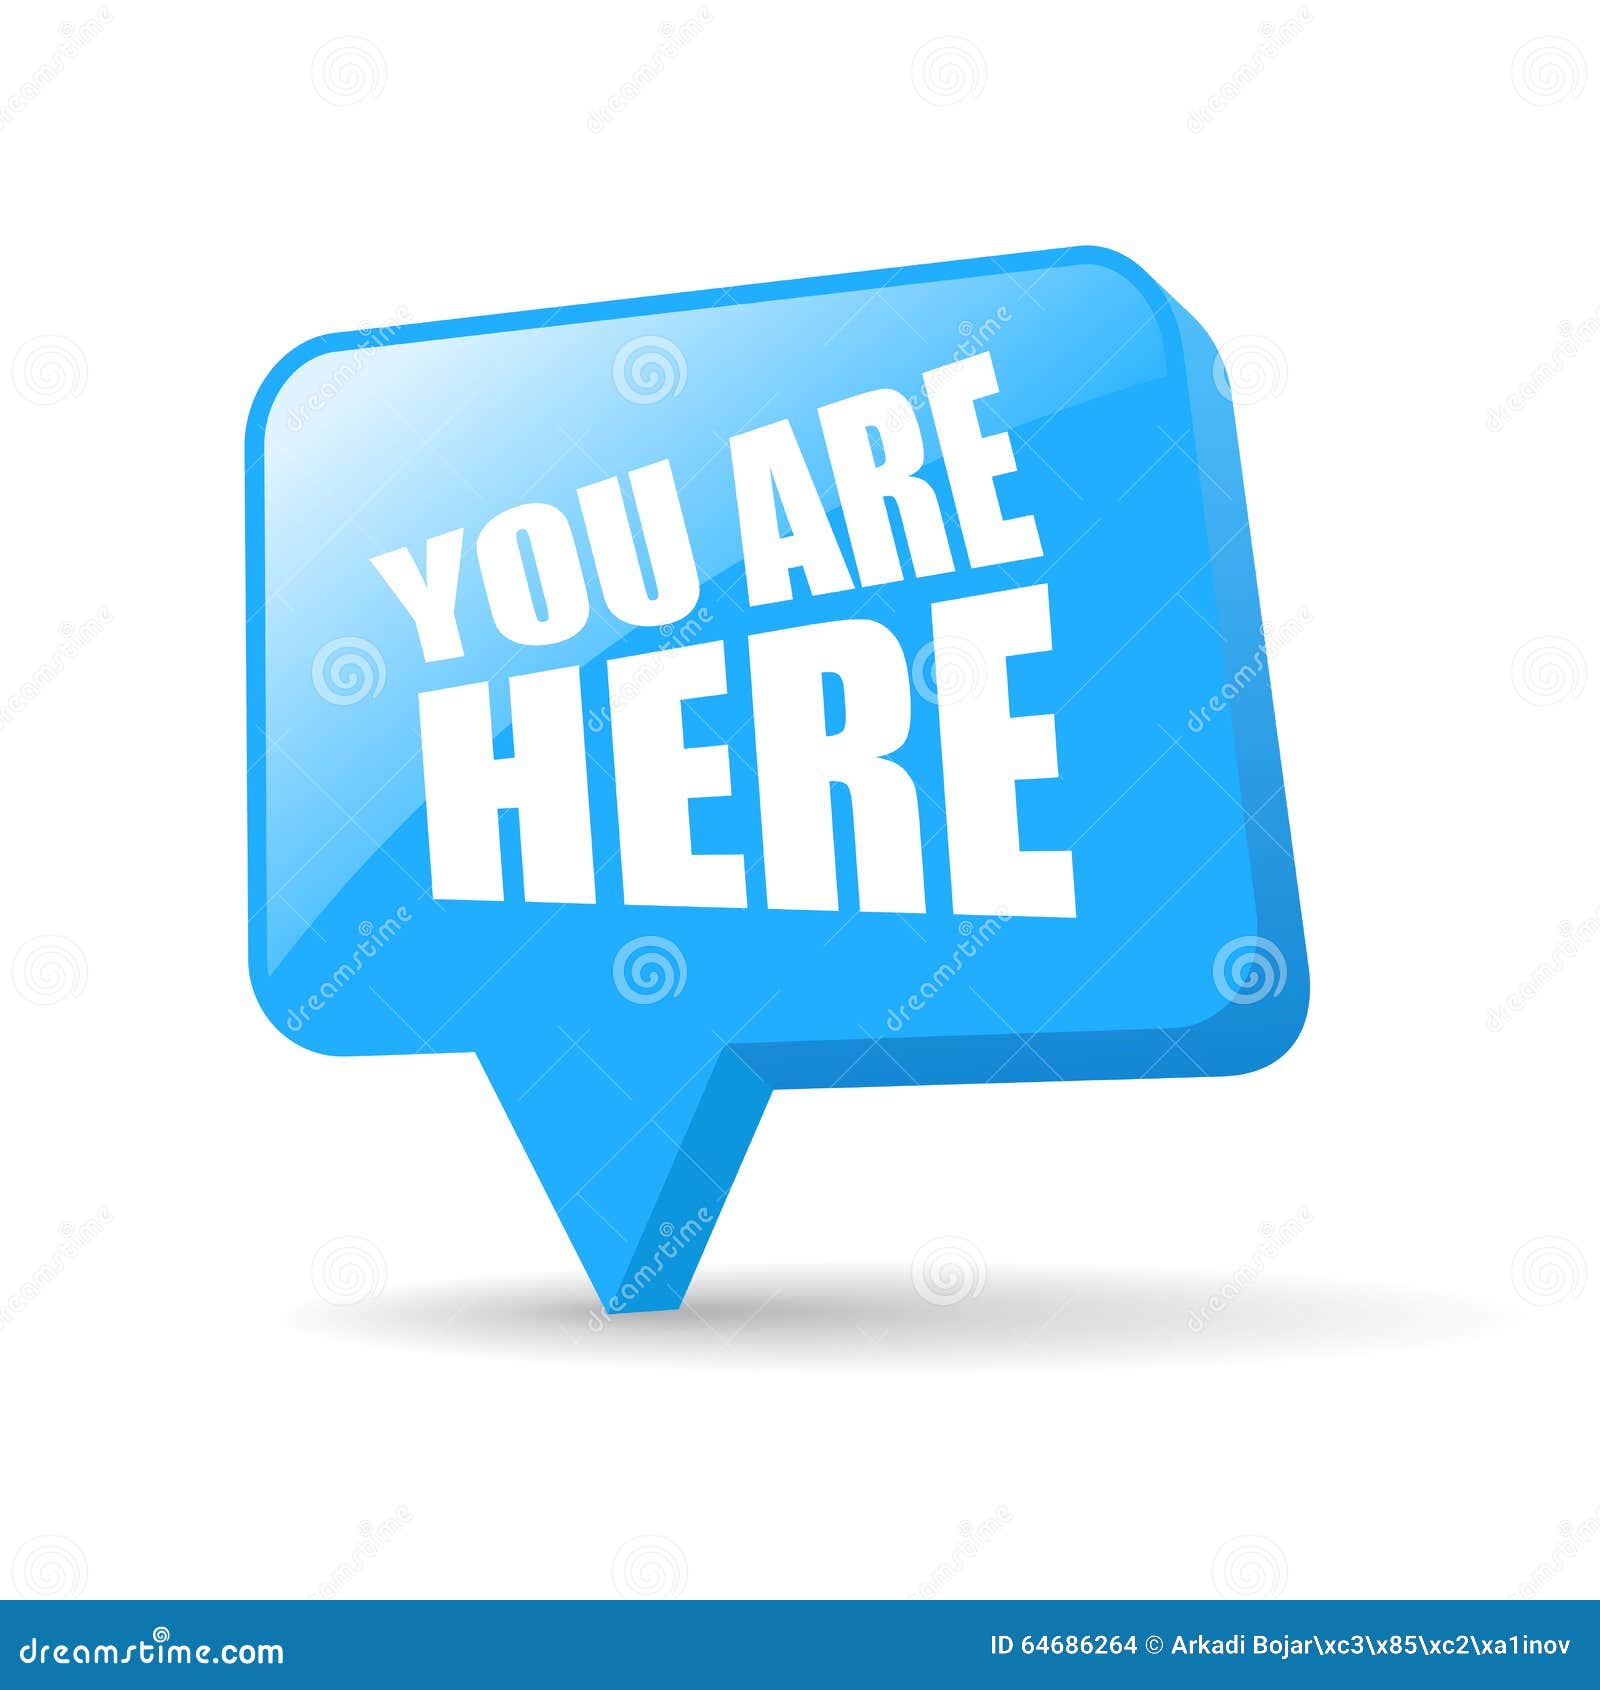 clipart you are here - photo #32